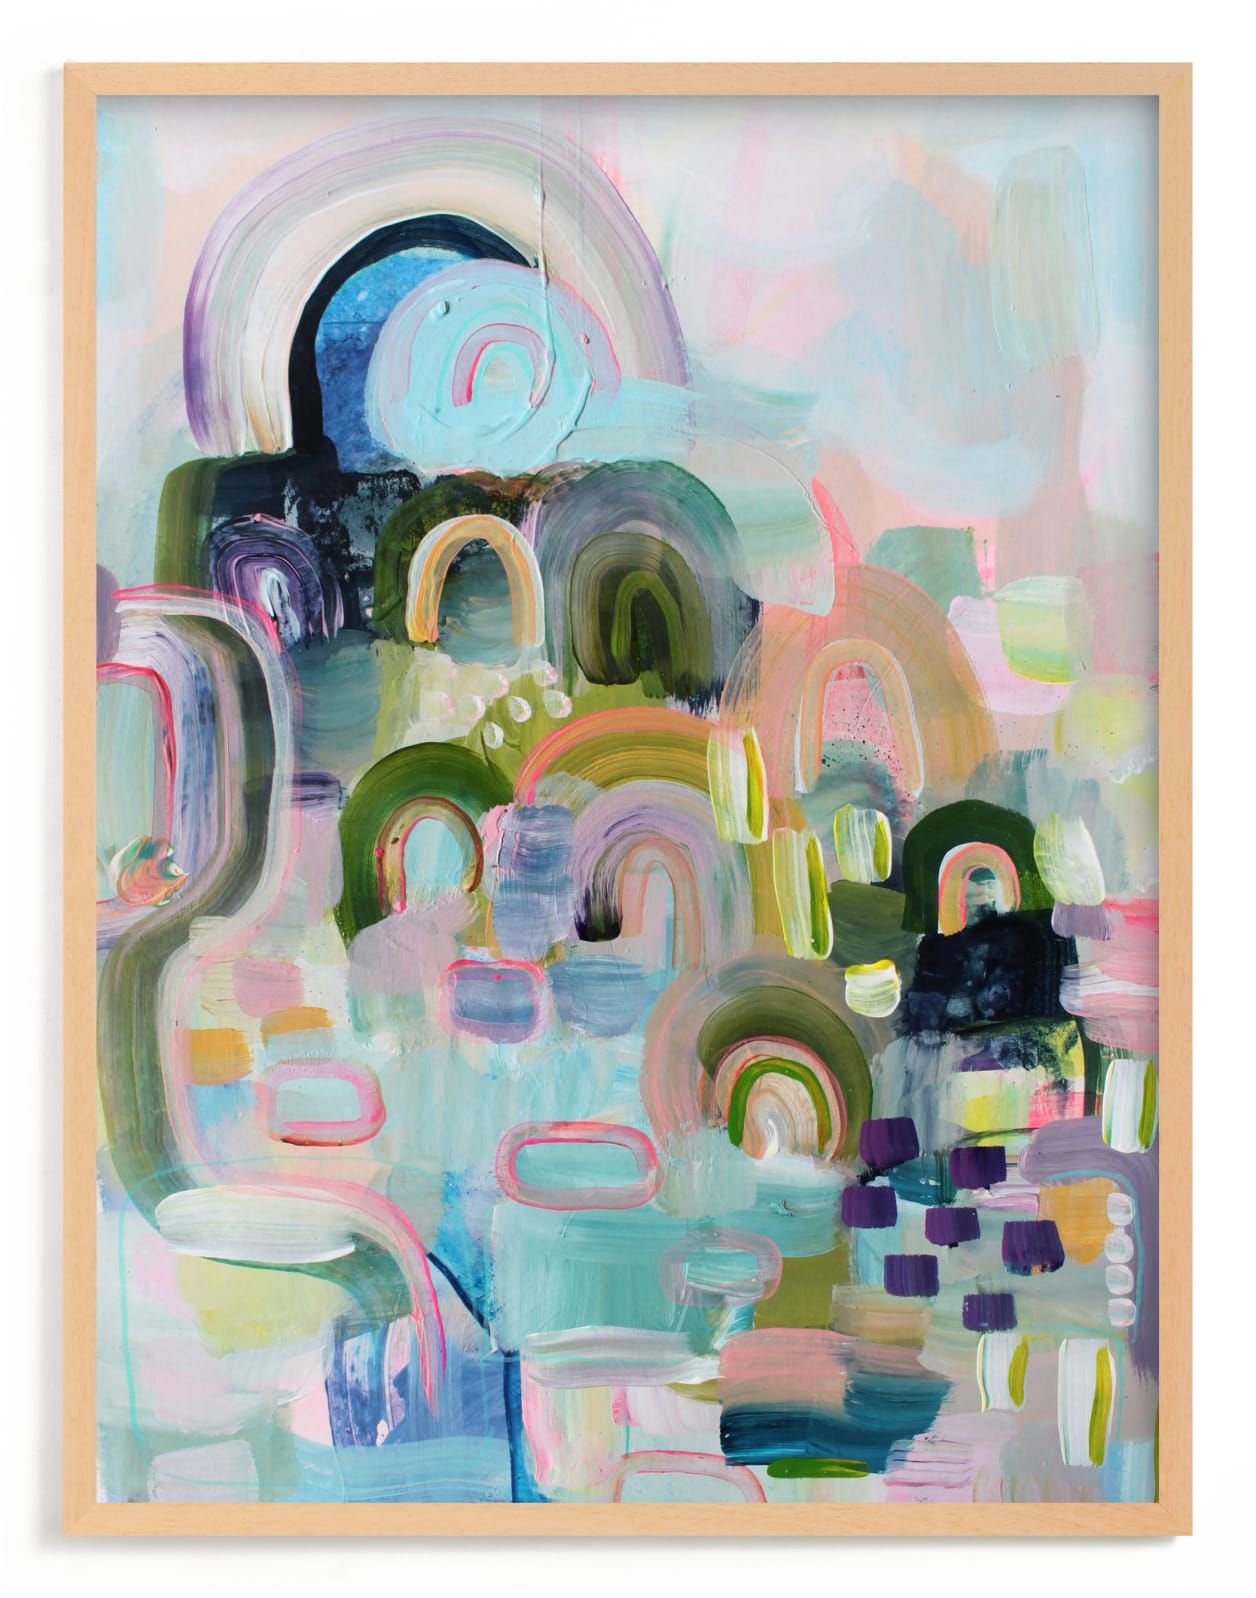 "Let's Play I" - Painting Limited Edition Art Print by Synnöve Seidman. | Minted